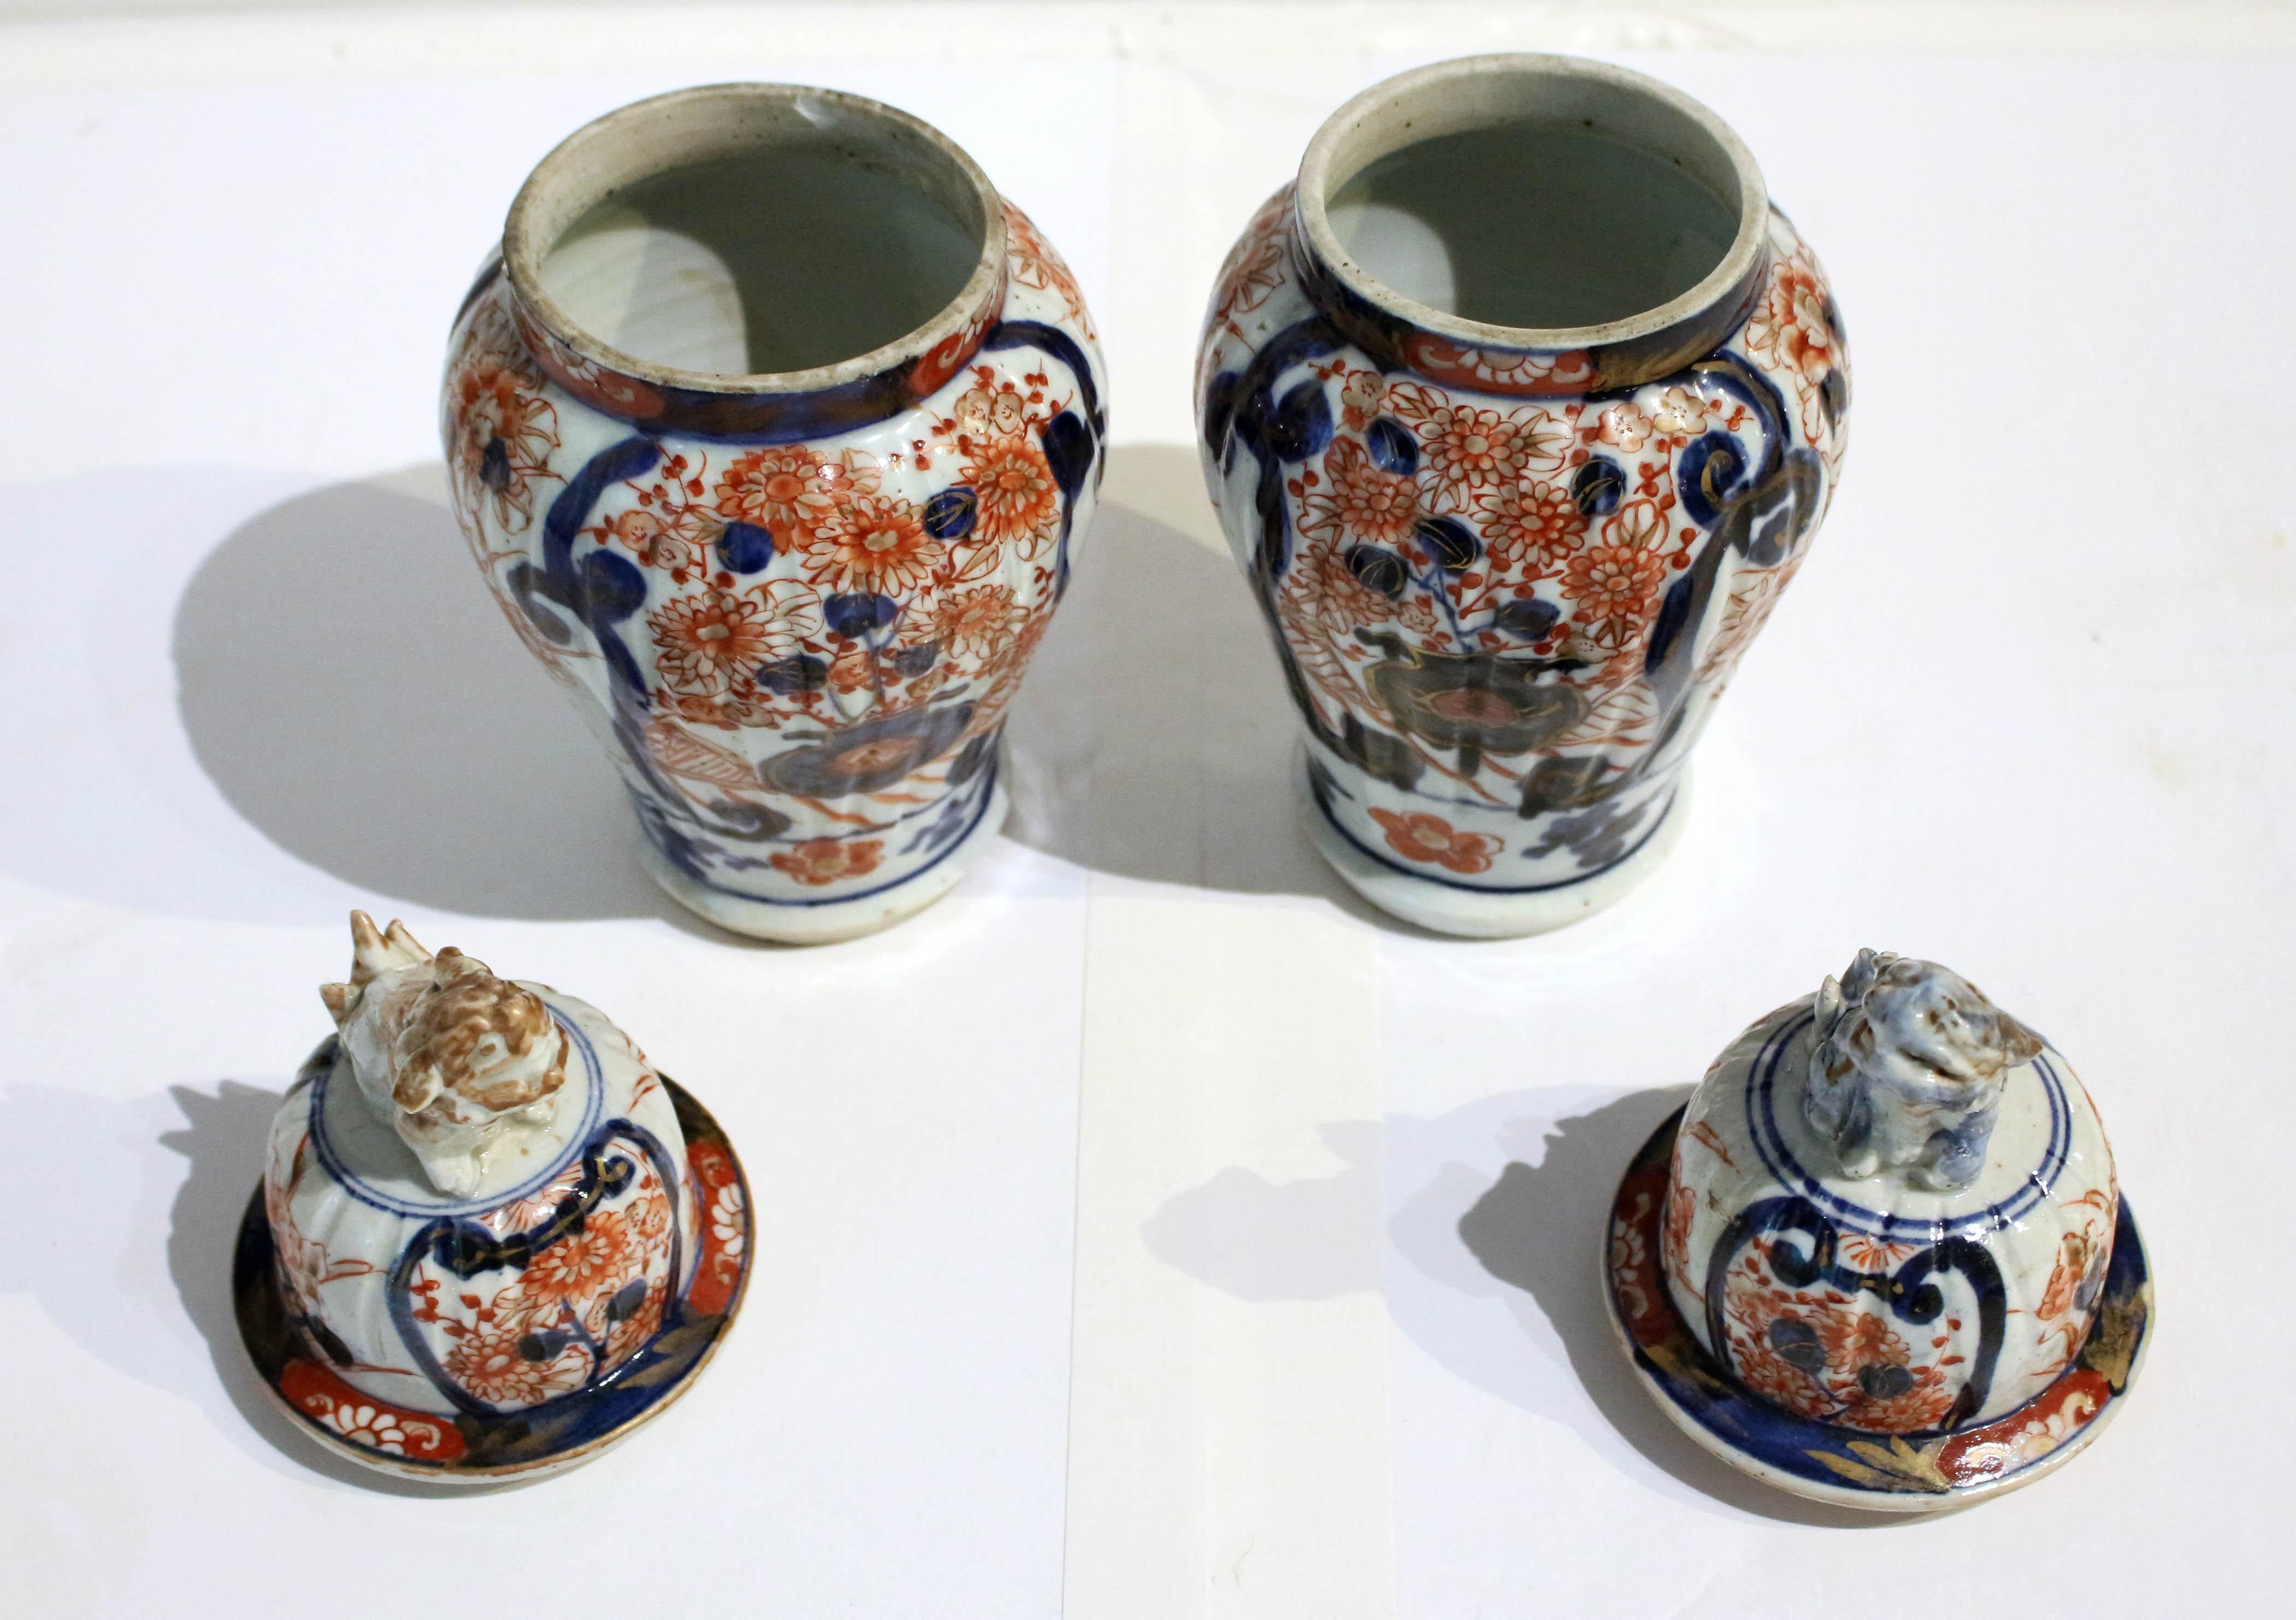 Circa 1860s pair of Imari covered vases, Japanese. Ribbed bodies. Well decorated with cartouches of exuberant floral vases. Foo dog finials - one with red-brown glaze highlights the other with blue. Interior rim chip to one. Both with tail tip